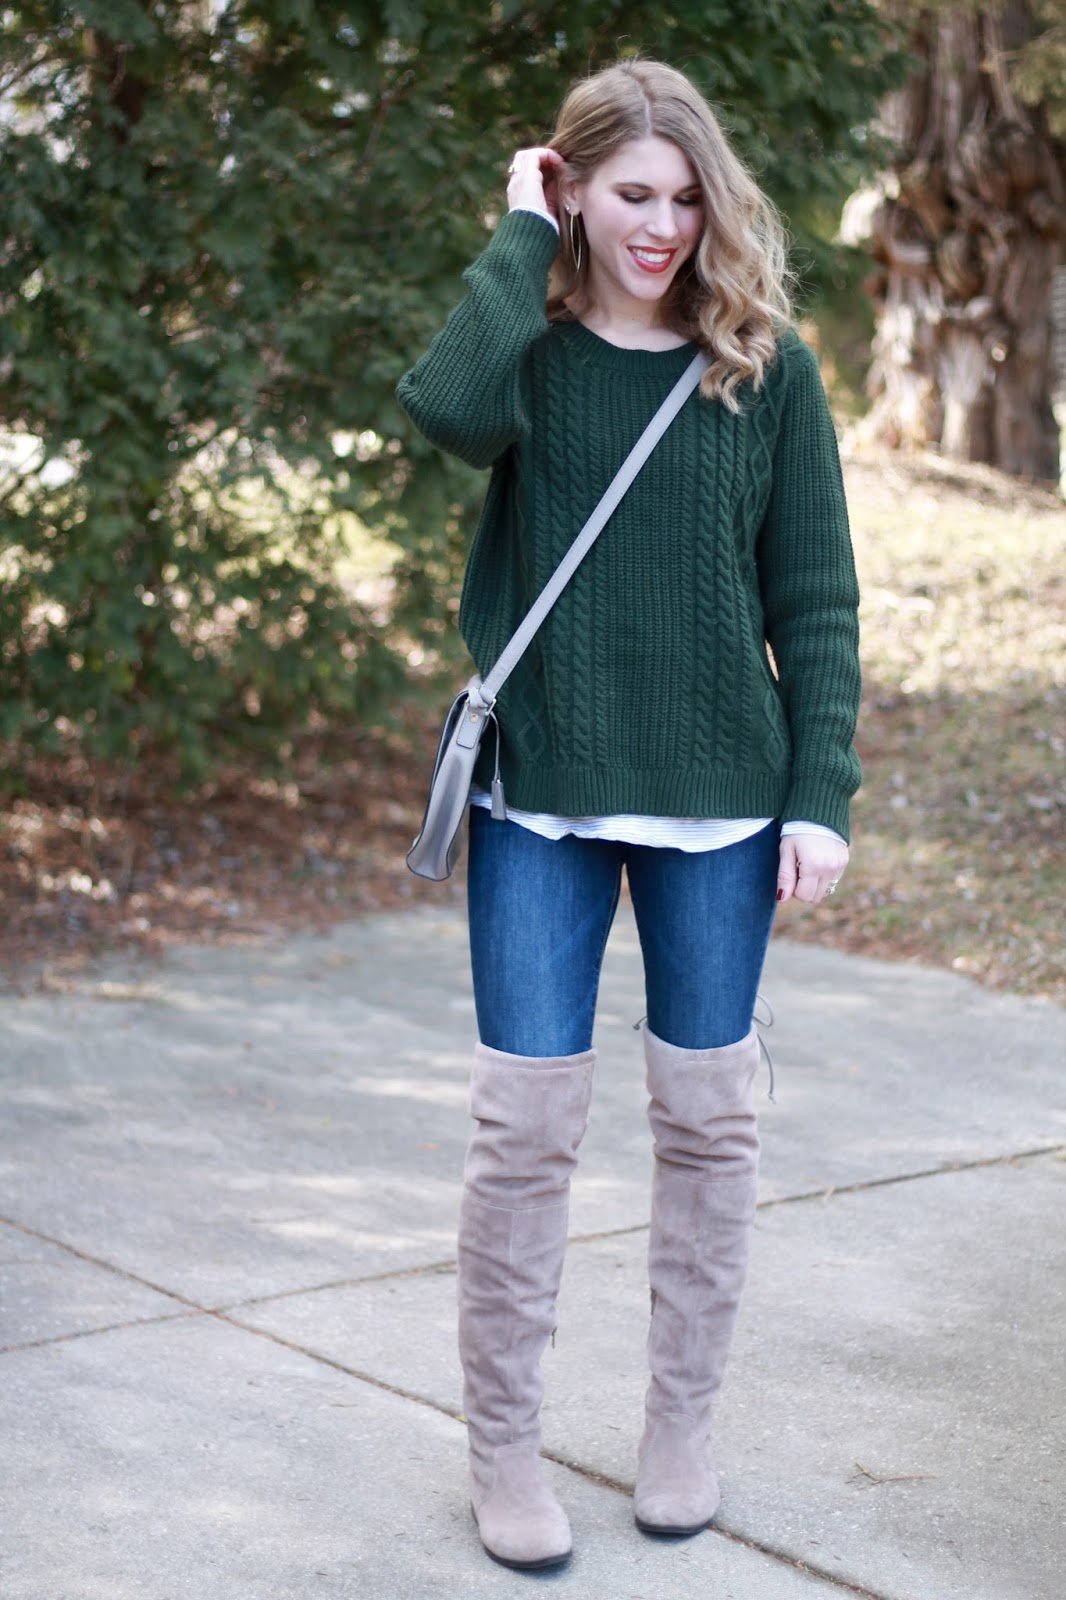 I do deClaire: Oversized Green Sweater